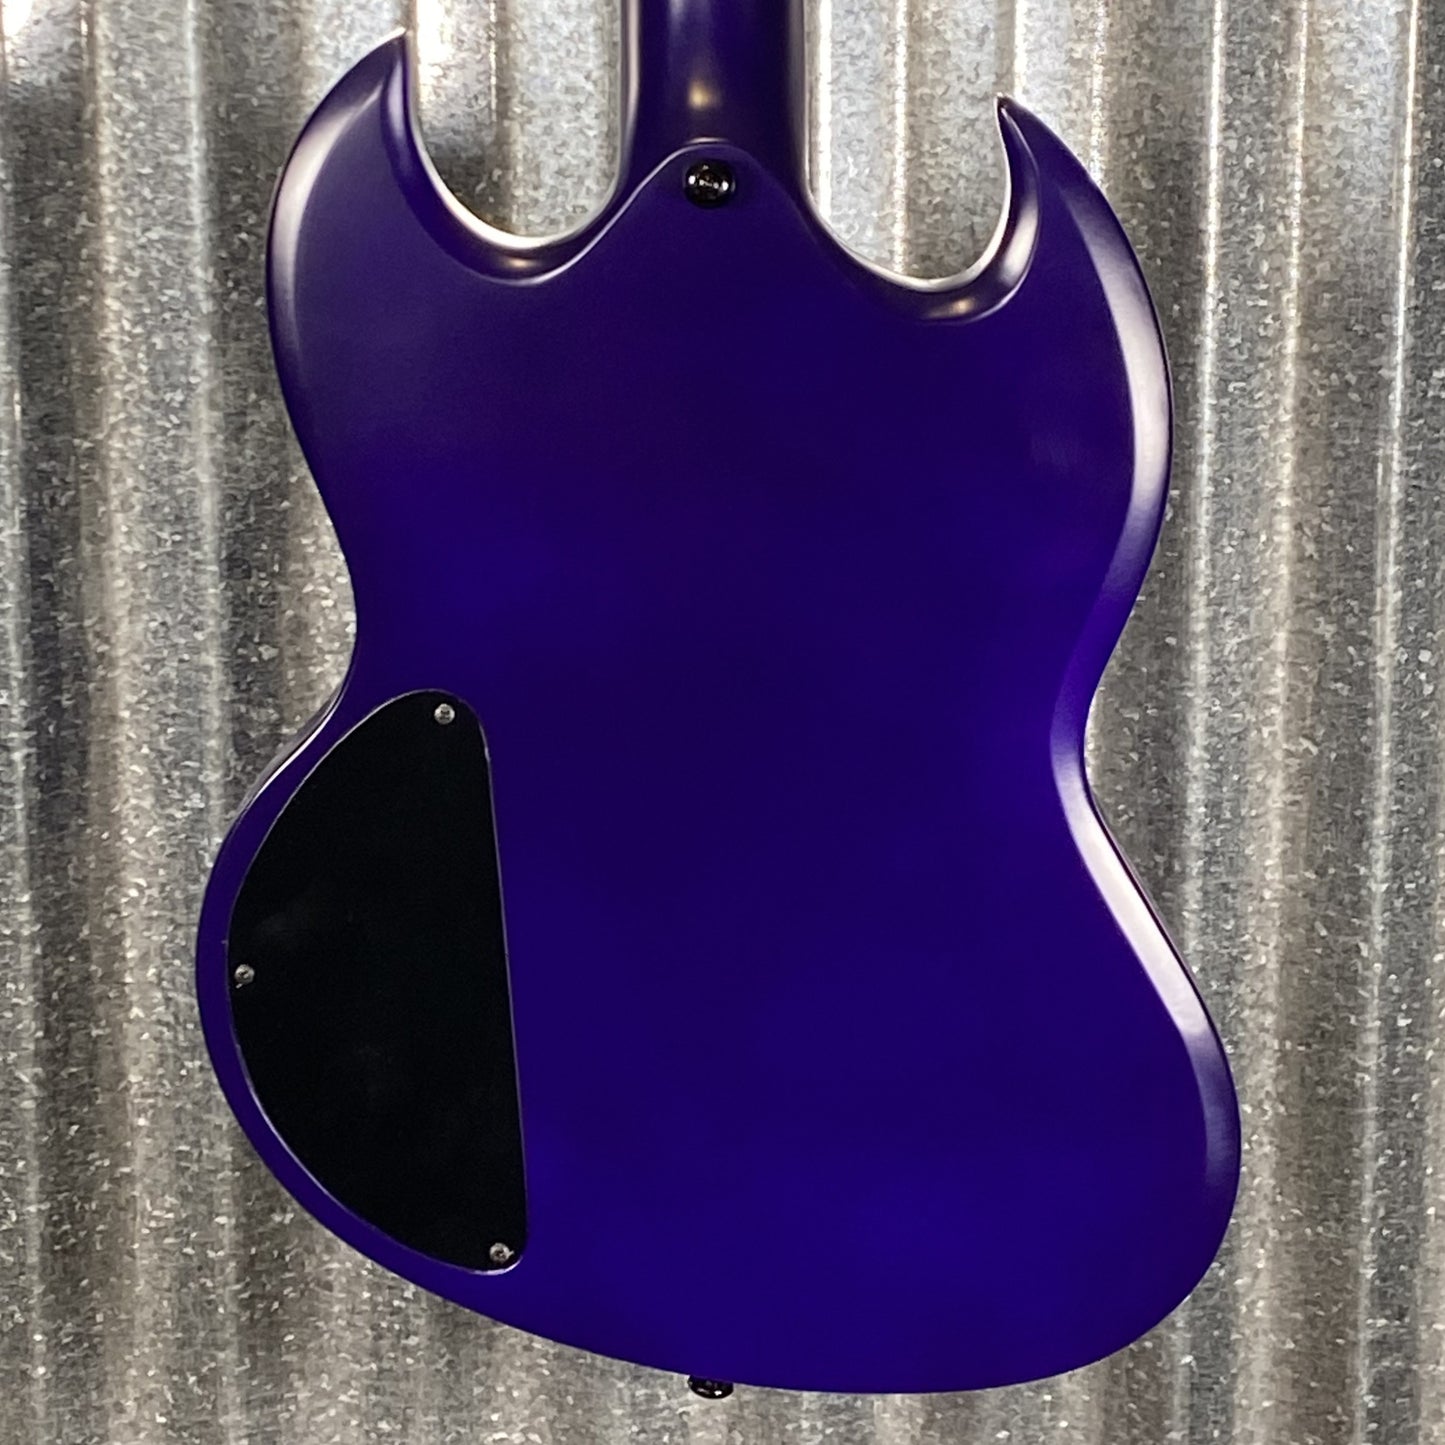 Westcreek Racer Offset SG Purple Satin Solid Body Guitar #0130 Used